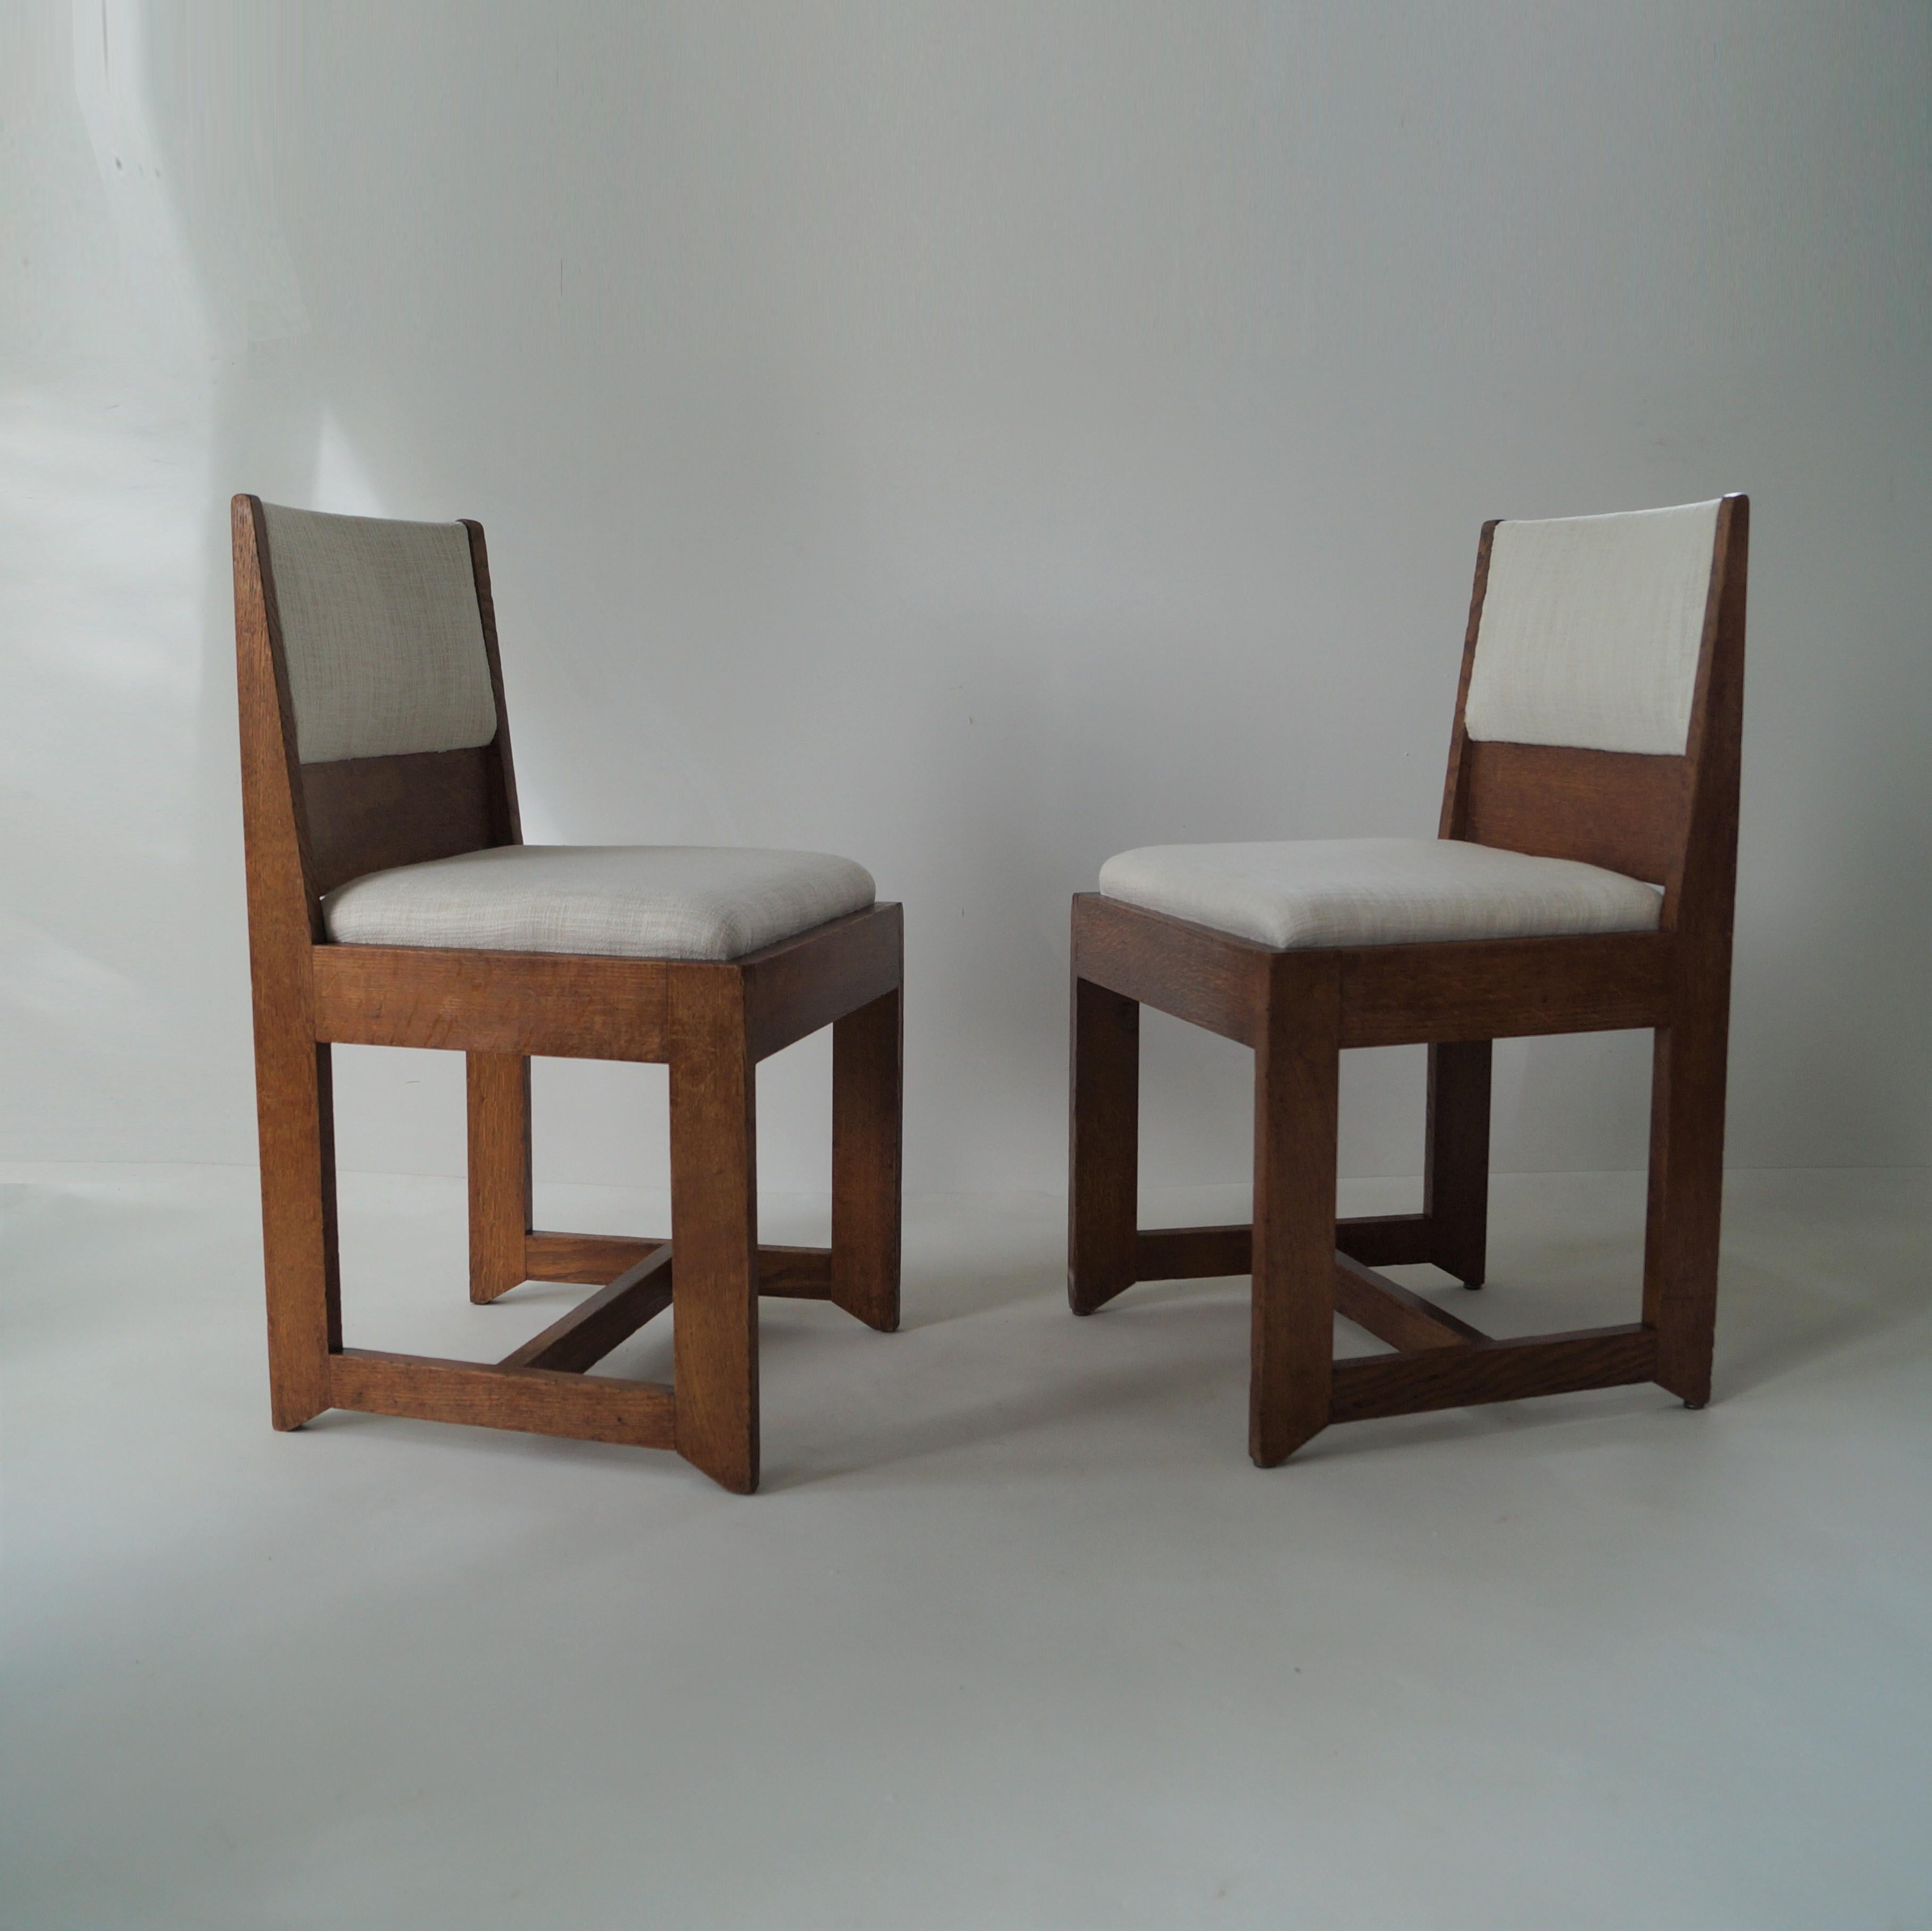 Set of dining or side chairs bij Hendrik Wouda for Pander, 1924. Modernist, rationalist and Haagse School. The chairs are reupholstered in a light fabric. 

Hendrik Wouda (1885 - 1946) was a Dutch architect, interior designer and furniture